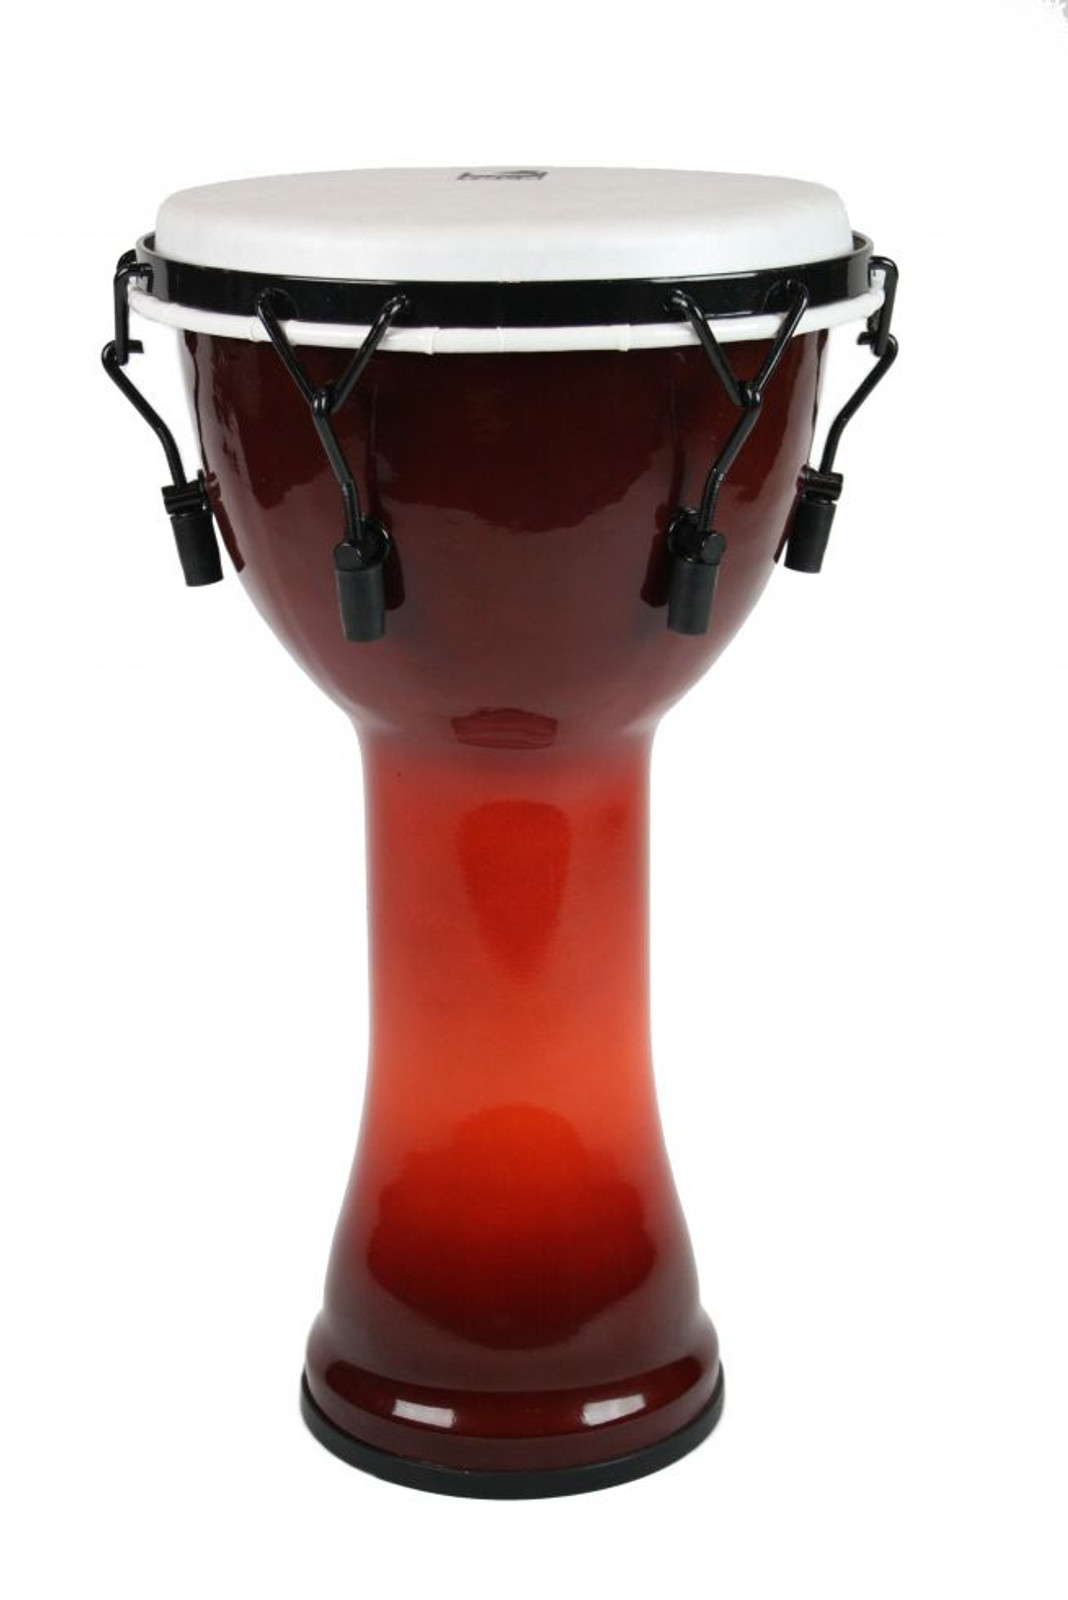 Freestyle II Mechanically Tuned Djembe , African Sunset, Synthetic Head, 14" Head x 26" Tall